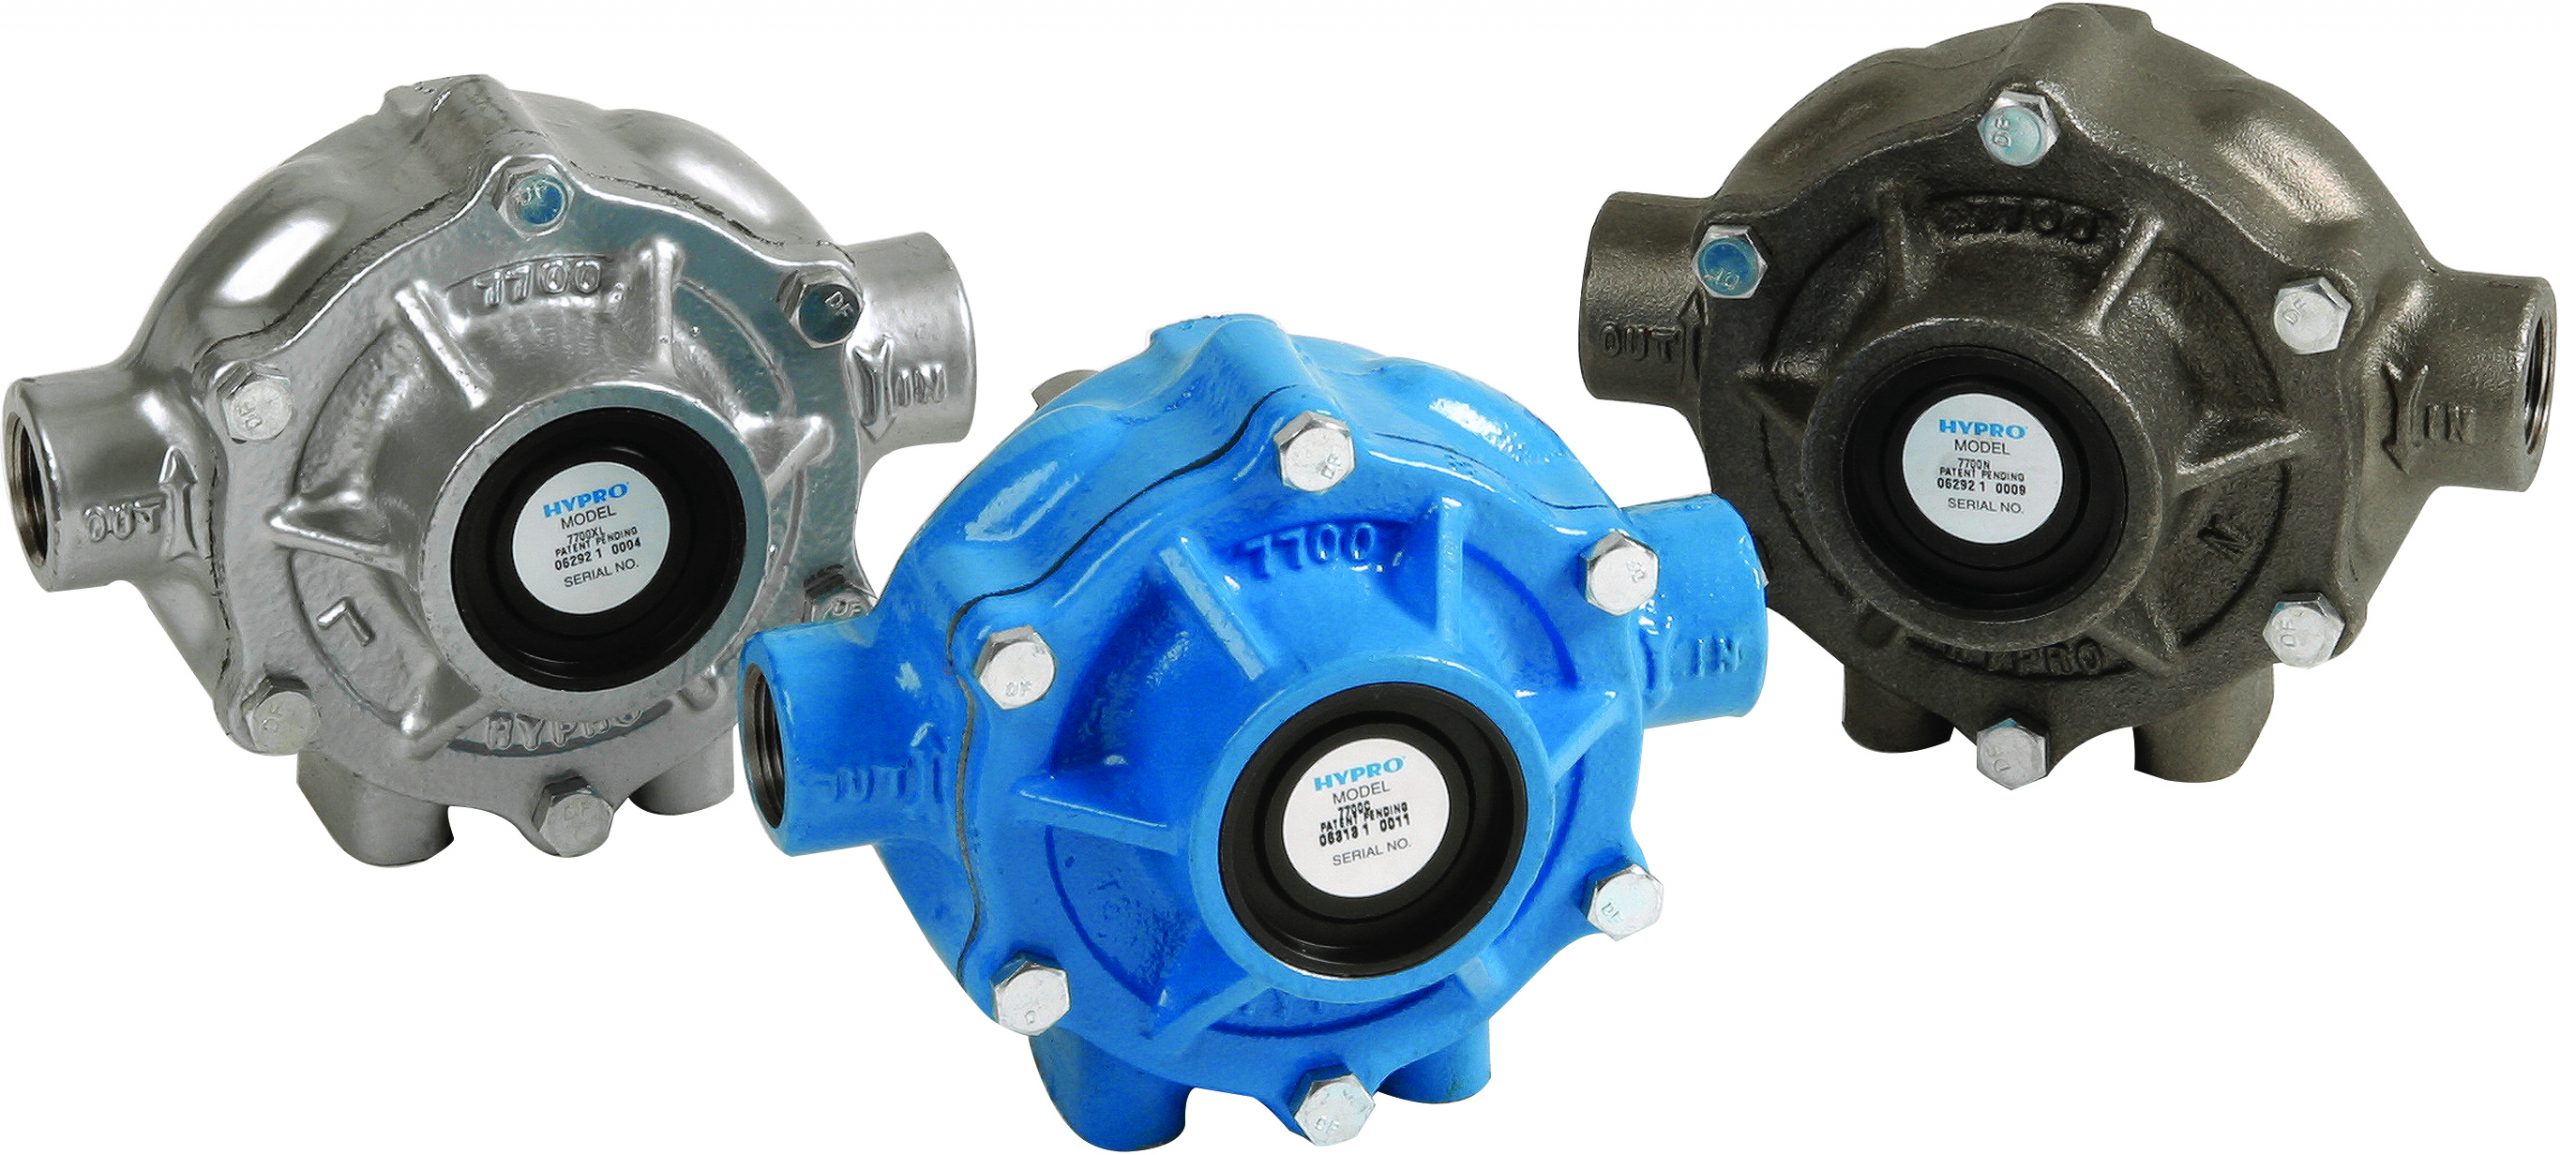 Hypro 7700 Series - 7 Roller, Cast Iron, Ni-Resist or Silver Series XL Roller Pumps